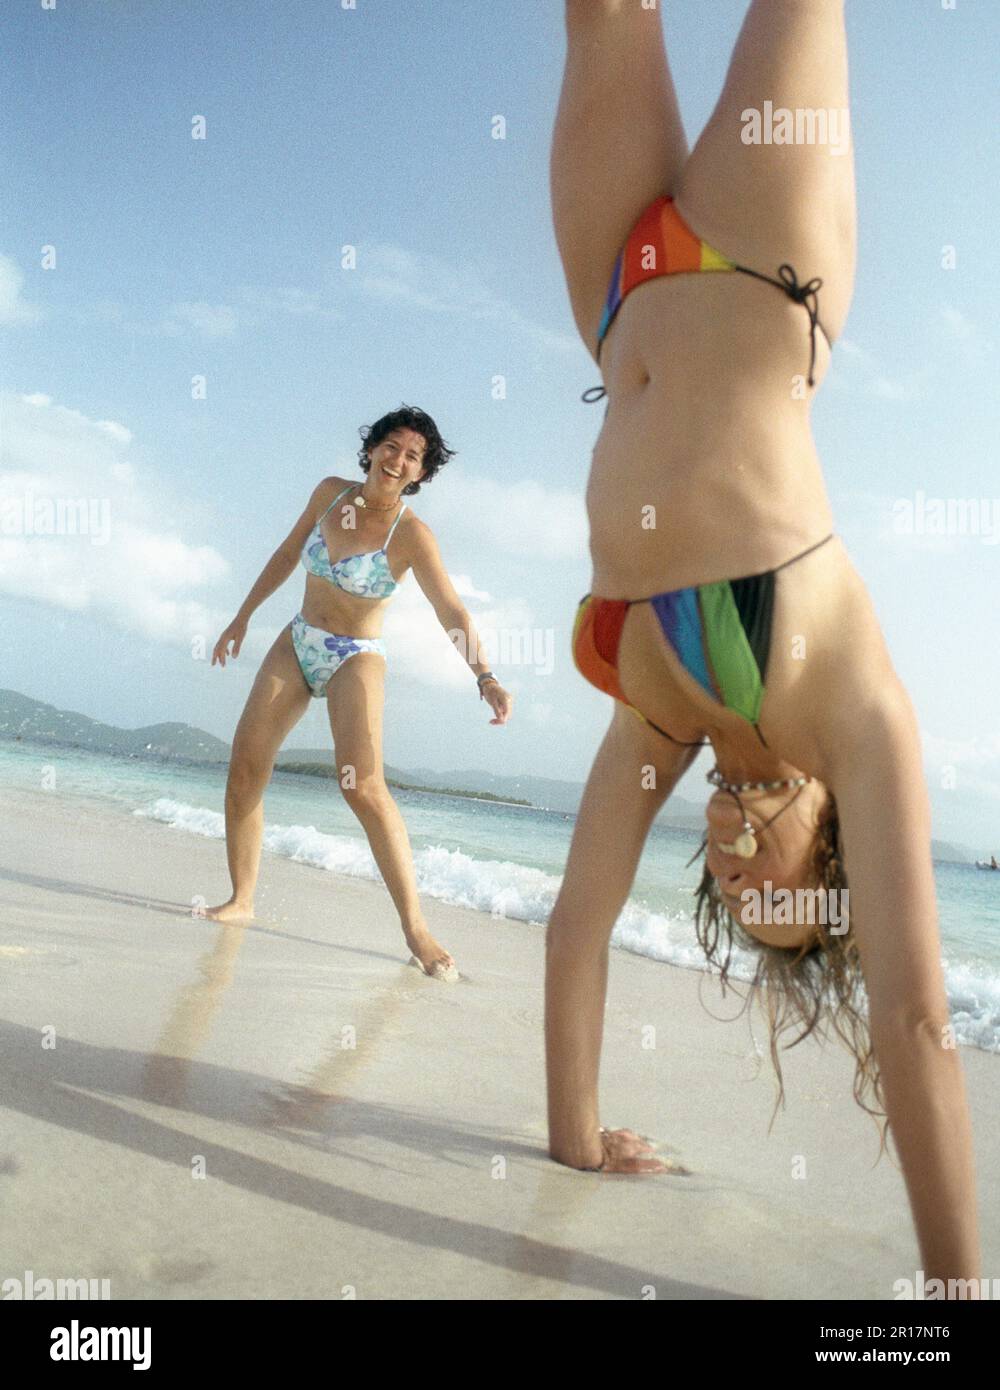 Two women playing on the beach. Stock Photo